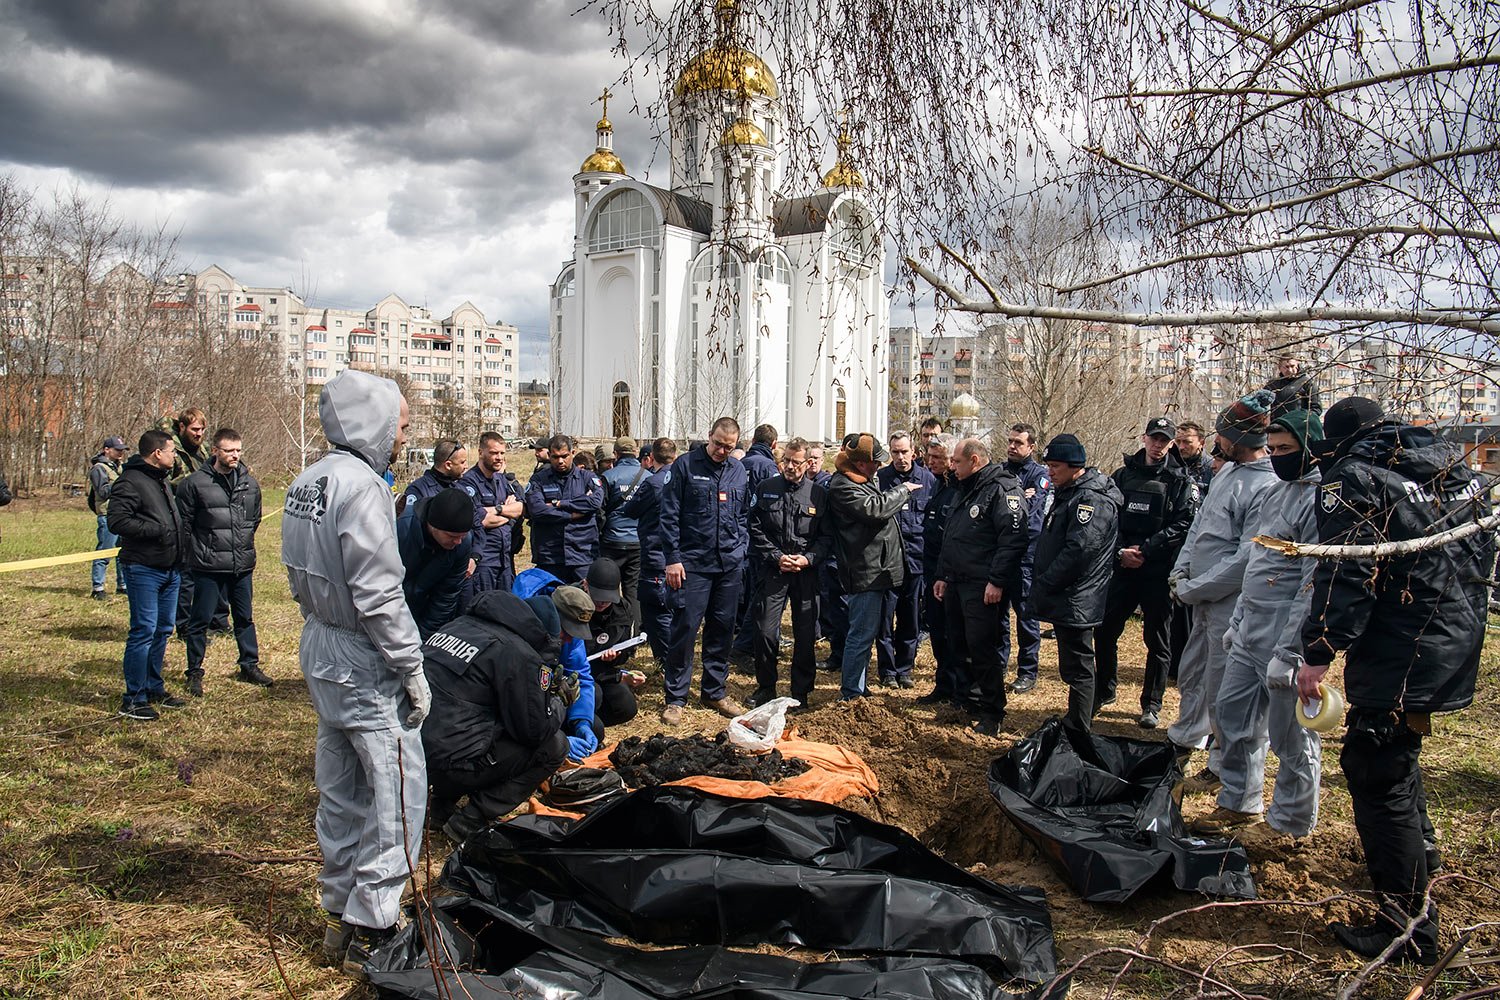  French forensics investigators, who arrived to Ukraine for the investigation of war crimes amid Russia's invasion, stand next to a mass grave in the town of Bucha, in Kyiv region, Ukraine, Tuesday, April 12, 2022. (AP Photo/Wladyslaw Musiienko) 